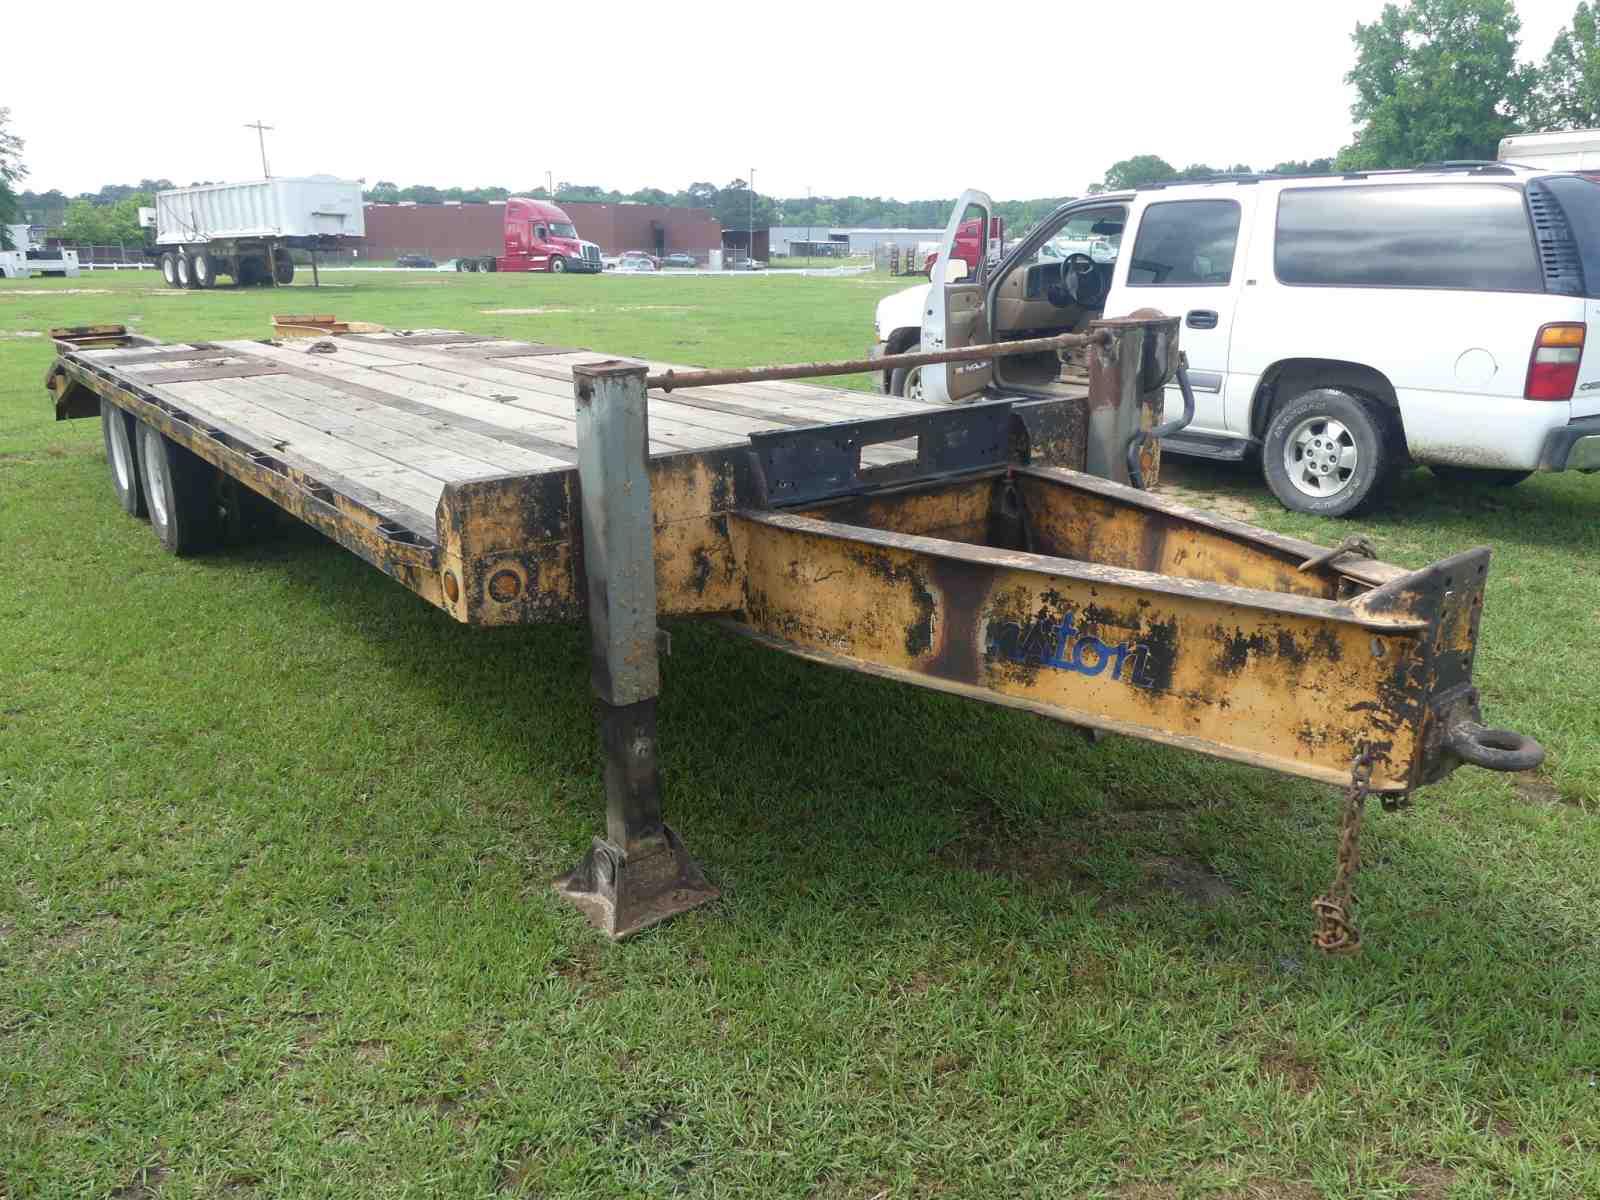 Winston Tag Trailer (No Serial Number Found - No Title - Bill of Sale Only)